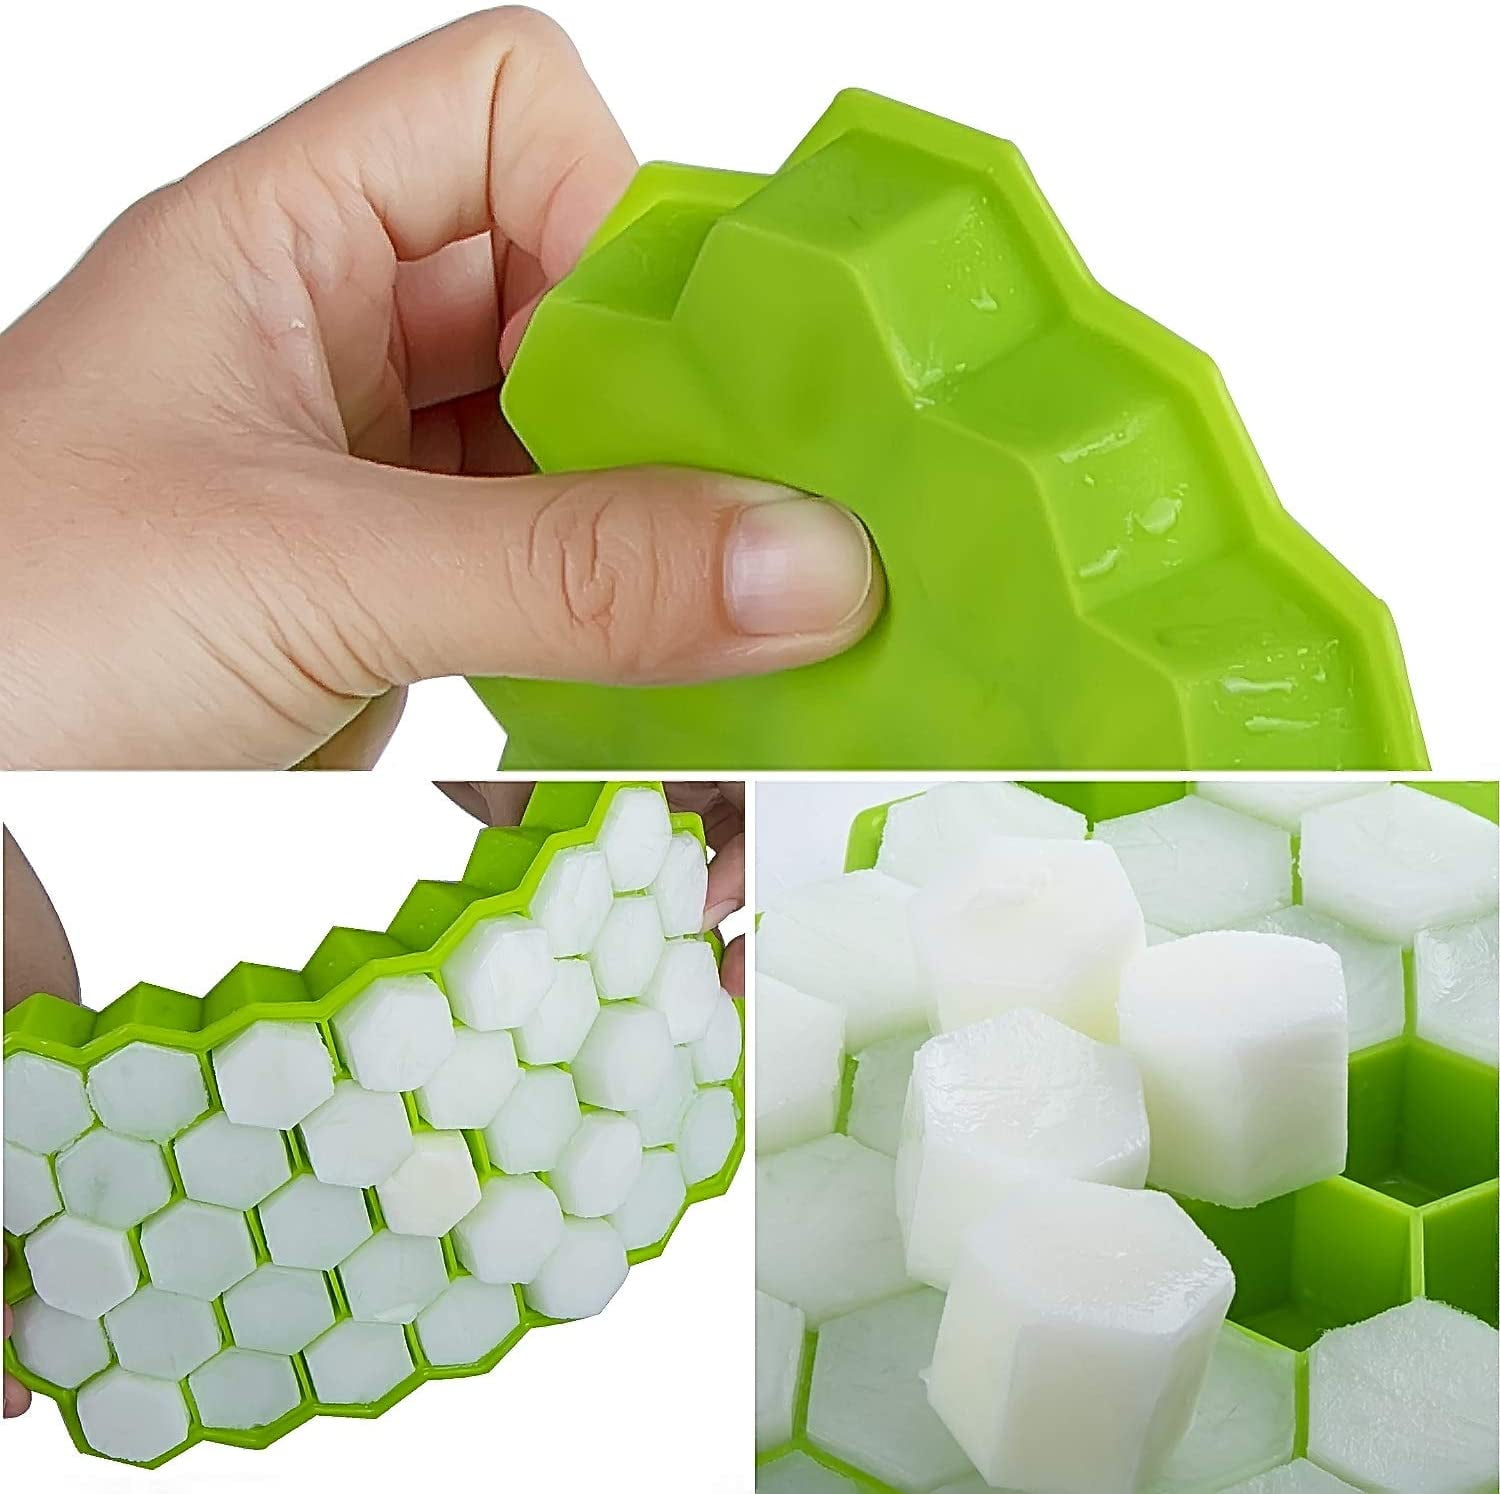 37 Cavity Honeycomb Ice Cube Trays Reusable Silicone Ice Cube Mold BPA Free  Ice Maker with Removable Lids - AliExpress